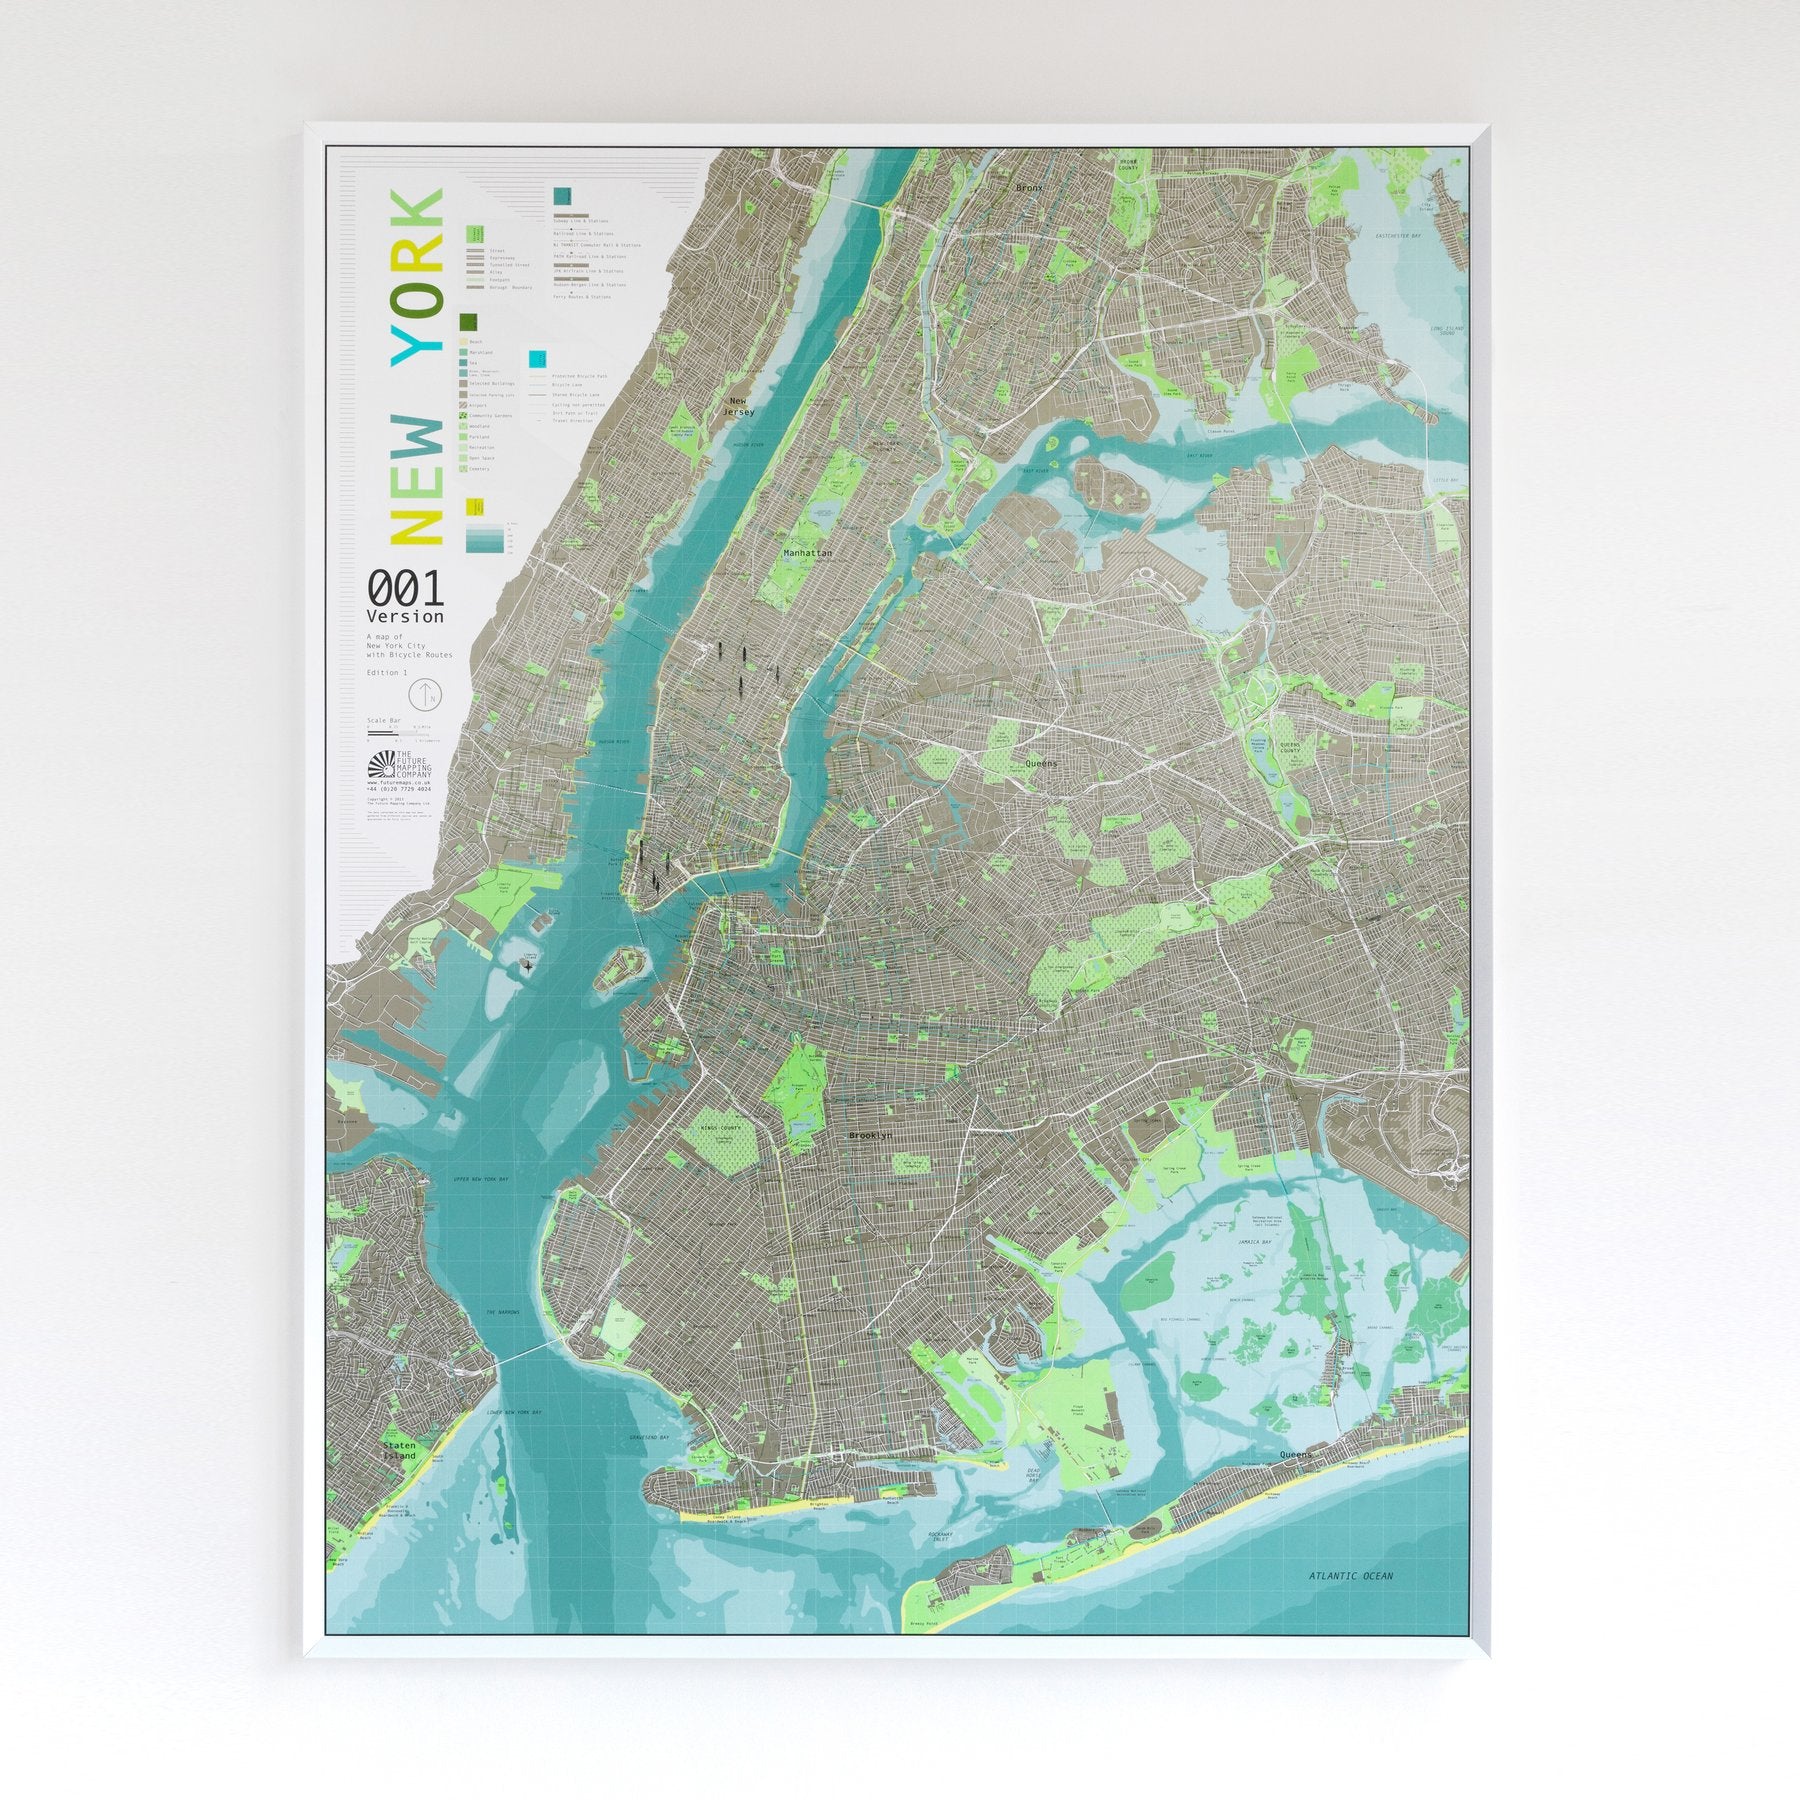 Ü187 New York Map - The Future Mapping Company